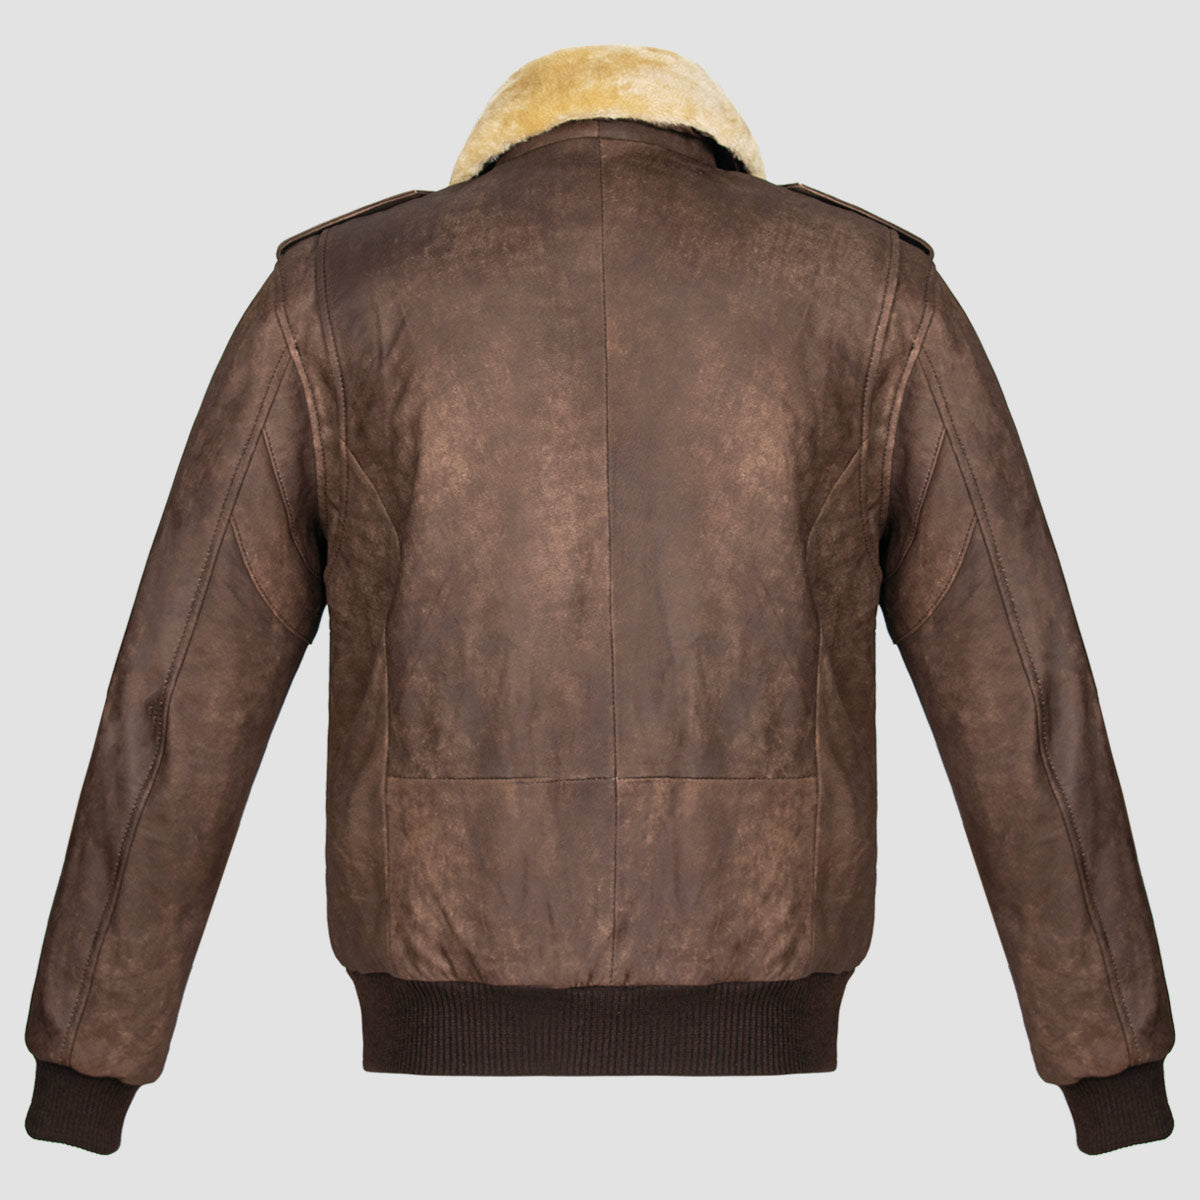 Pierson Brown Leather Jacket with removeable collar